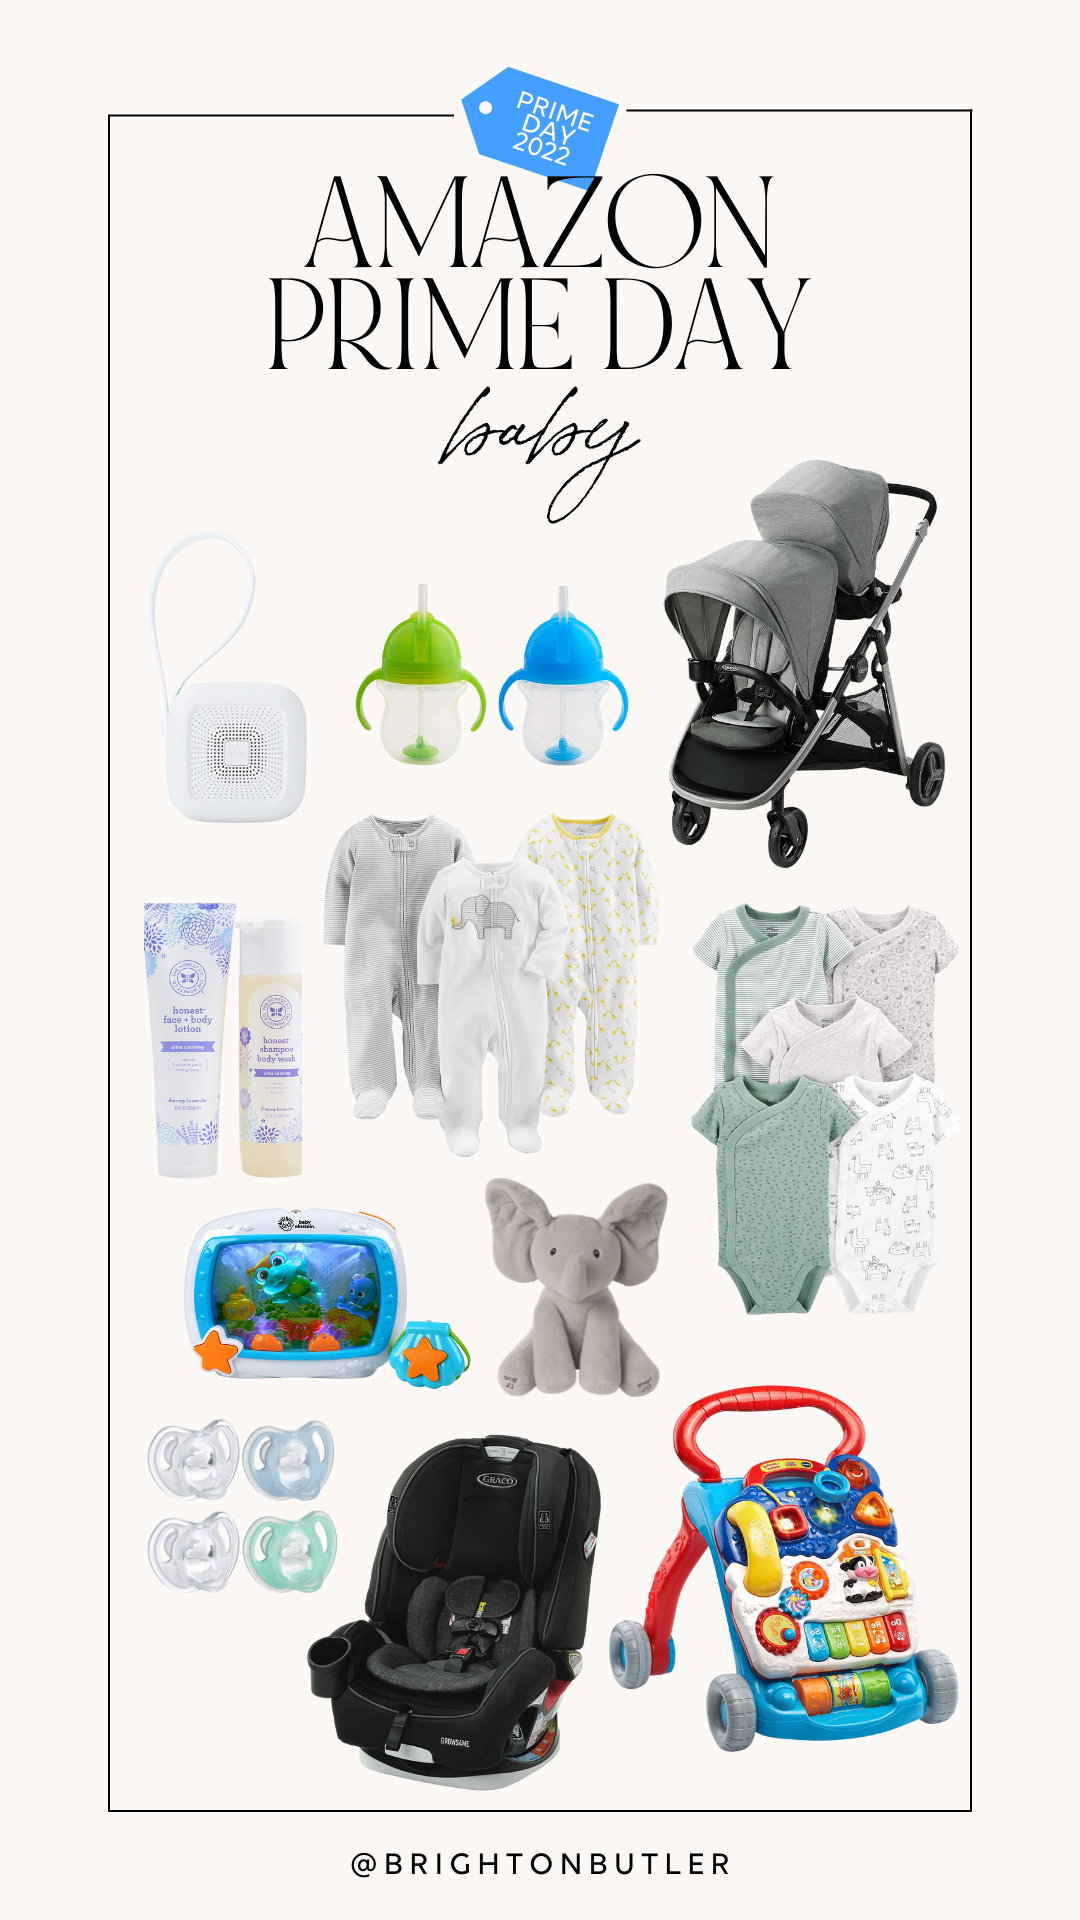 https://www.brightontheday.com/wp-content/uploads/2022/07/AMAZON-PRIME-DAY-2022-BABY.png